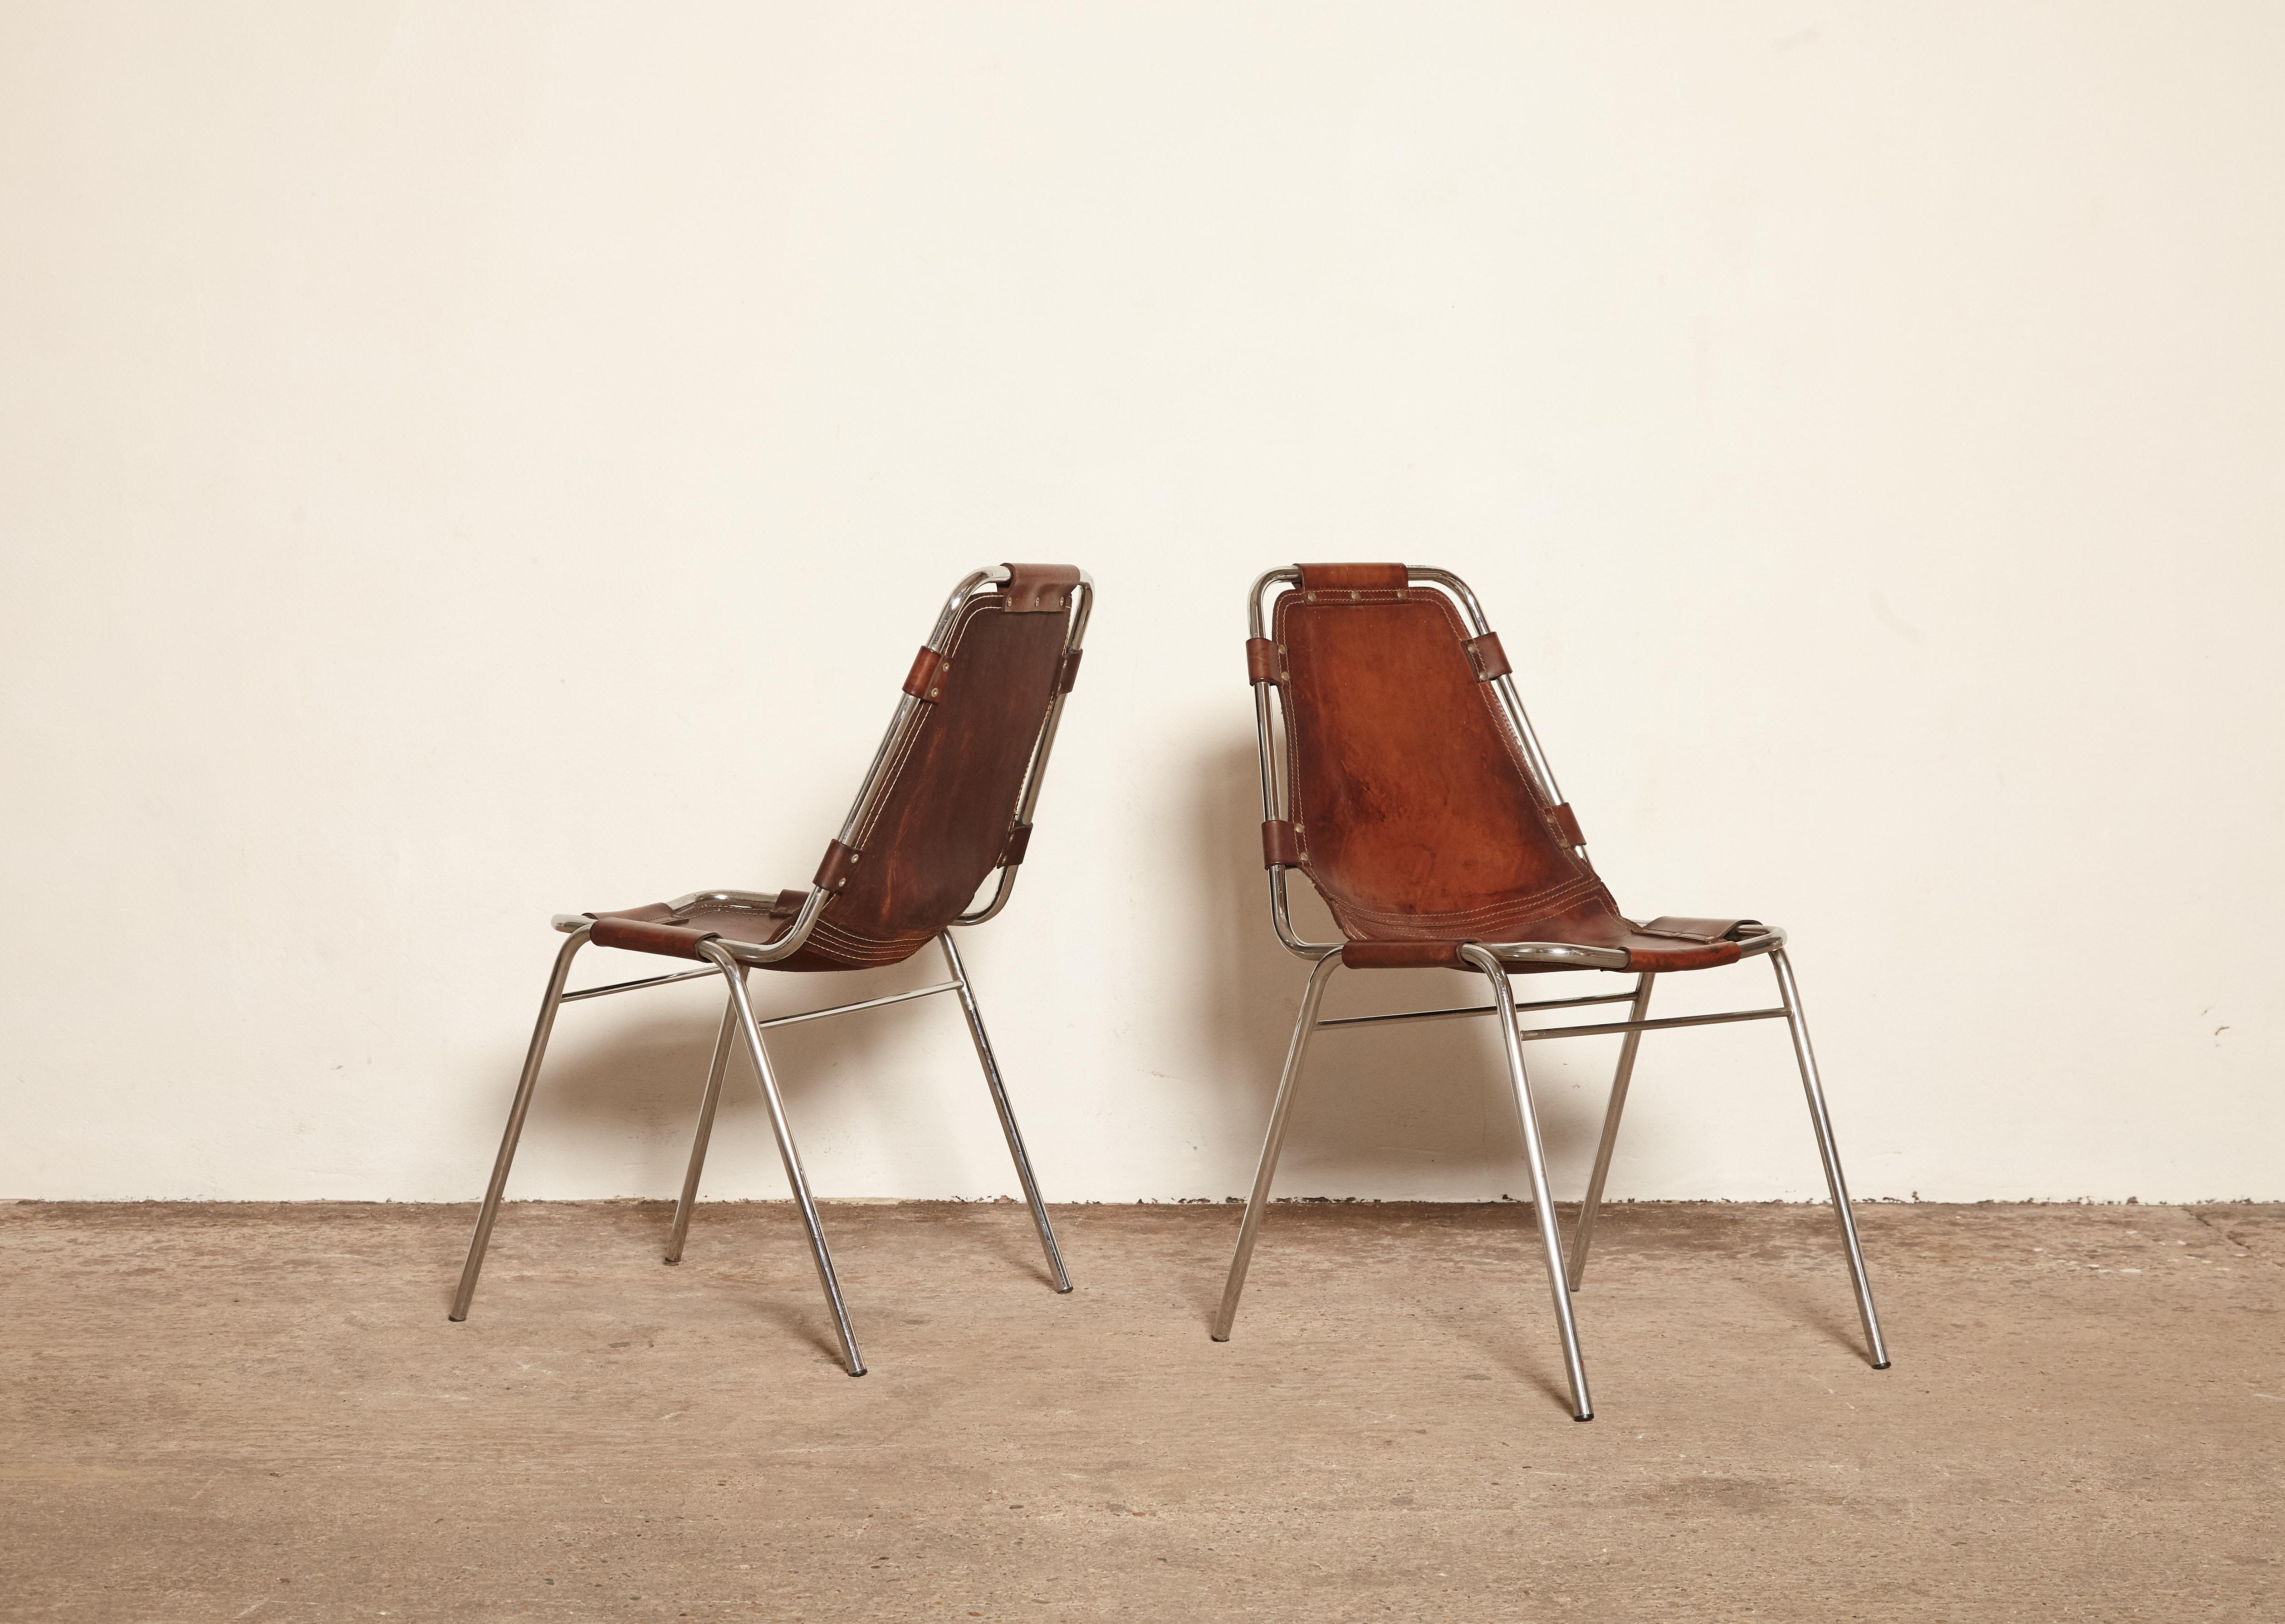 'Les Arcs' chairs in tubular steel and cognac leather, France/Italy, 1970s. Patinated original leather. 

Priced per chair.   Two are available.

Les Arcs was a project on which Charlotte Perriand collaborated with some other architects who